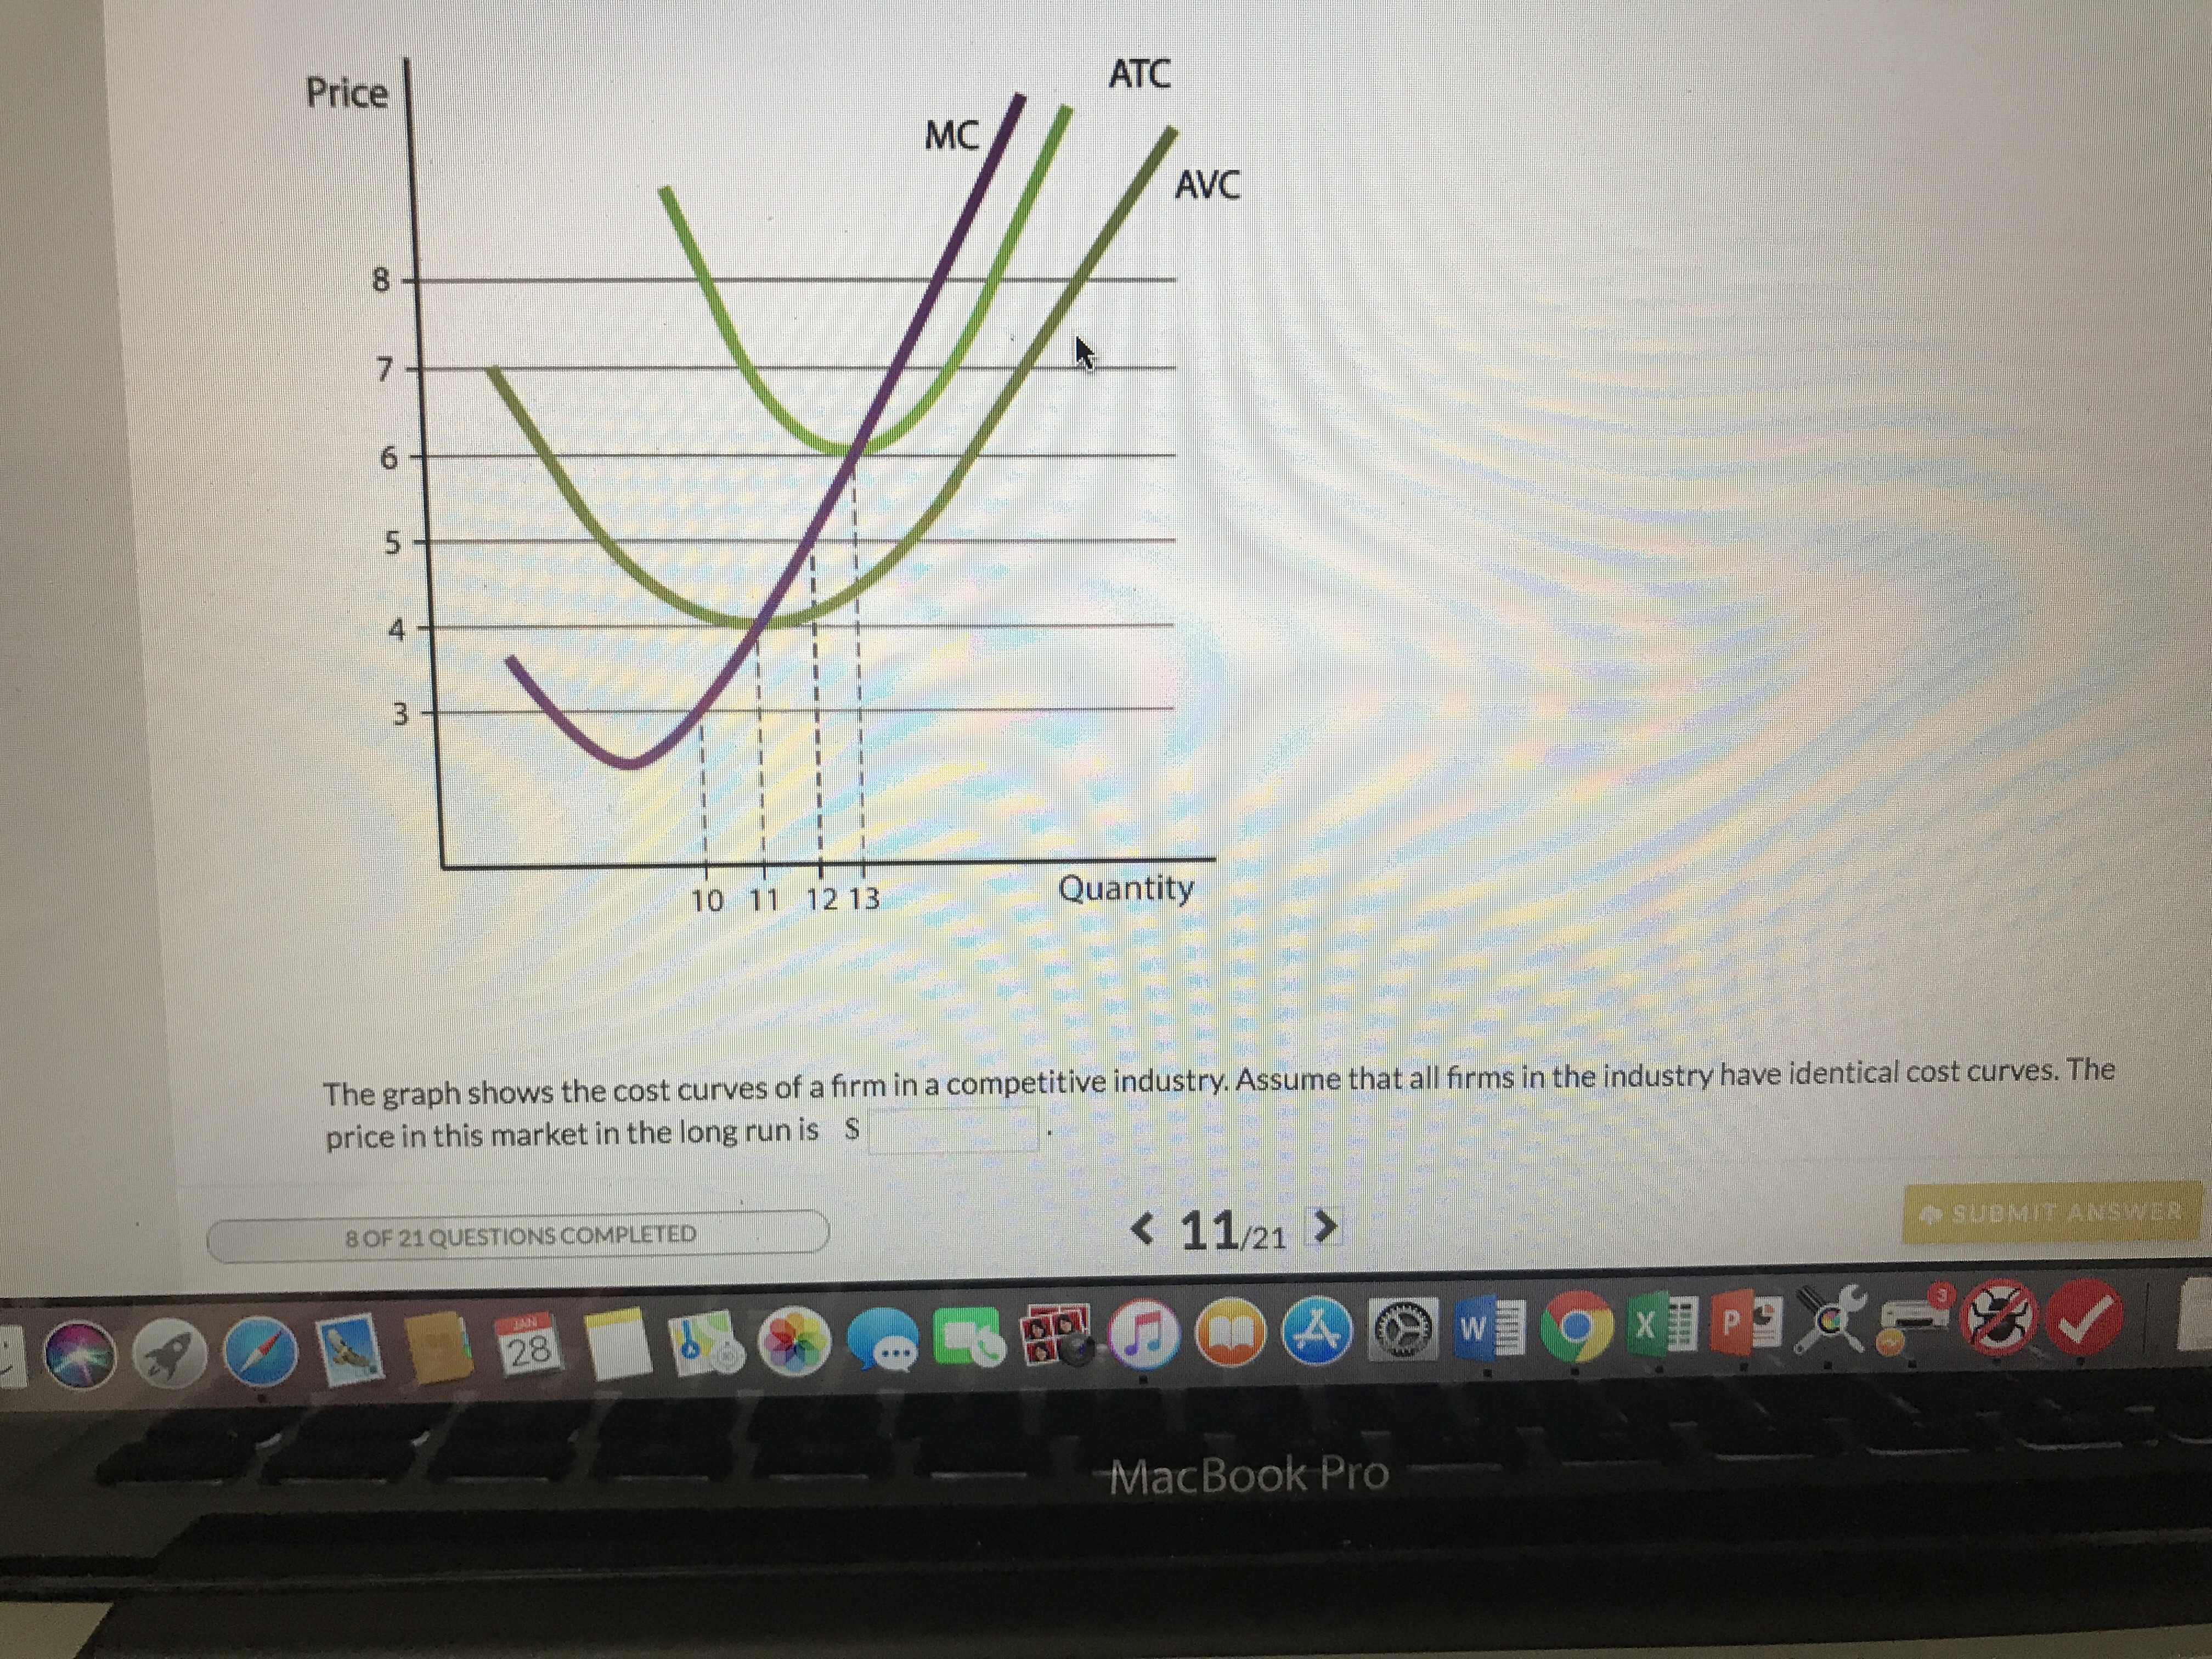 ATC
Price
MC
AVC
8
4
10 11 12 13
Quantity
The graph shows the cost curves of a firm in a competitive industry. Assume that all frms in the industry have identical cost curves. The
price in this market in the long run is S
K 11/21 >
o SUBMIT ANSWER
8OF 21QUESTIONS COMPLETED
MacBook Pro
